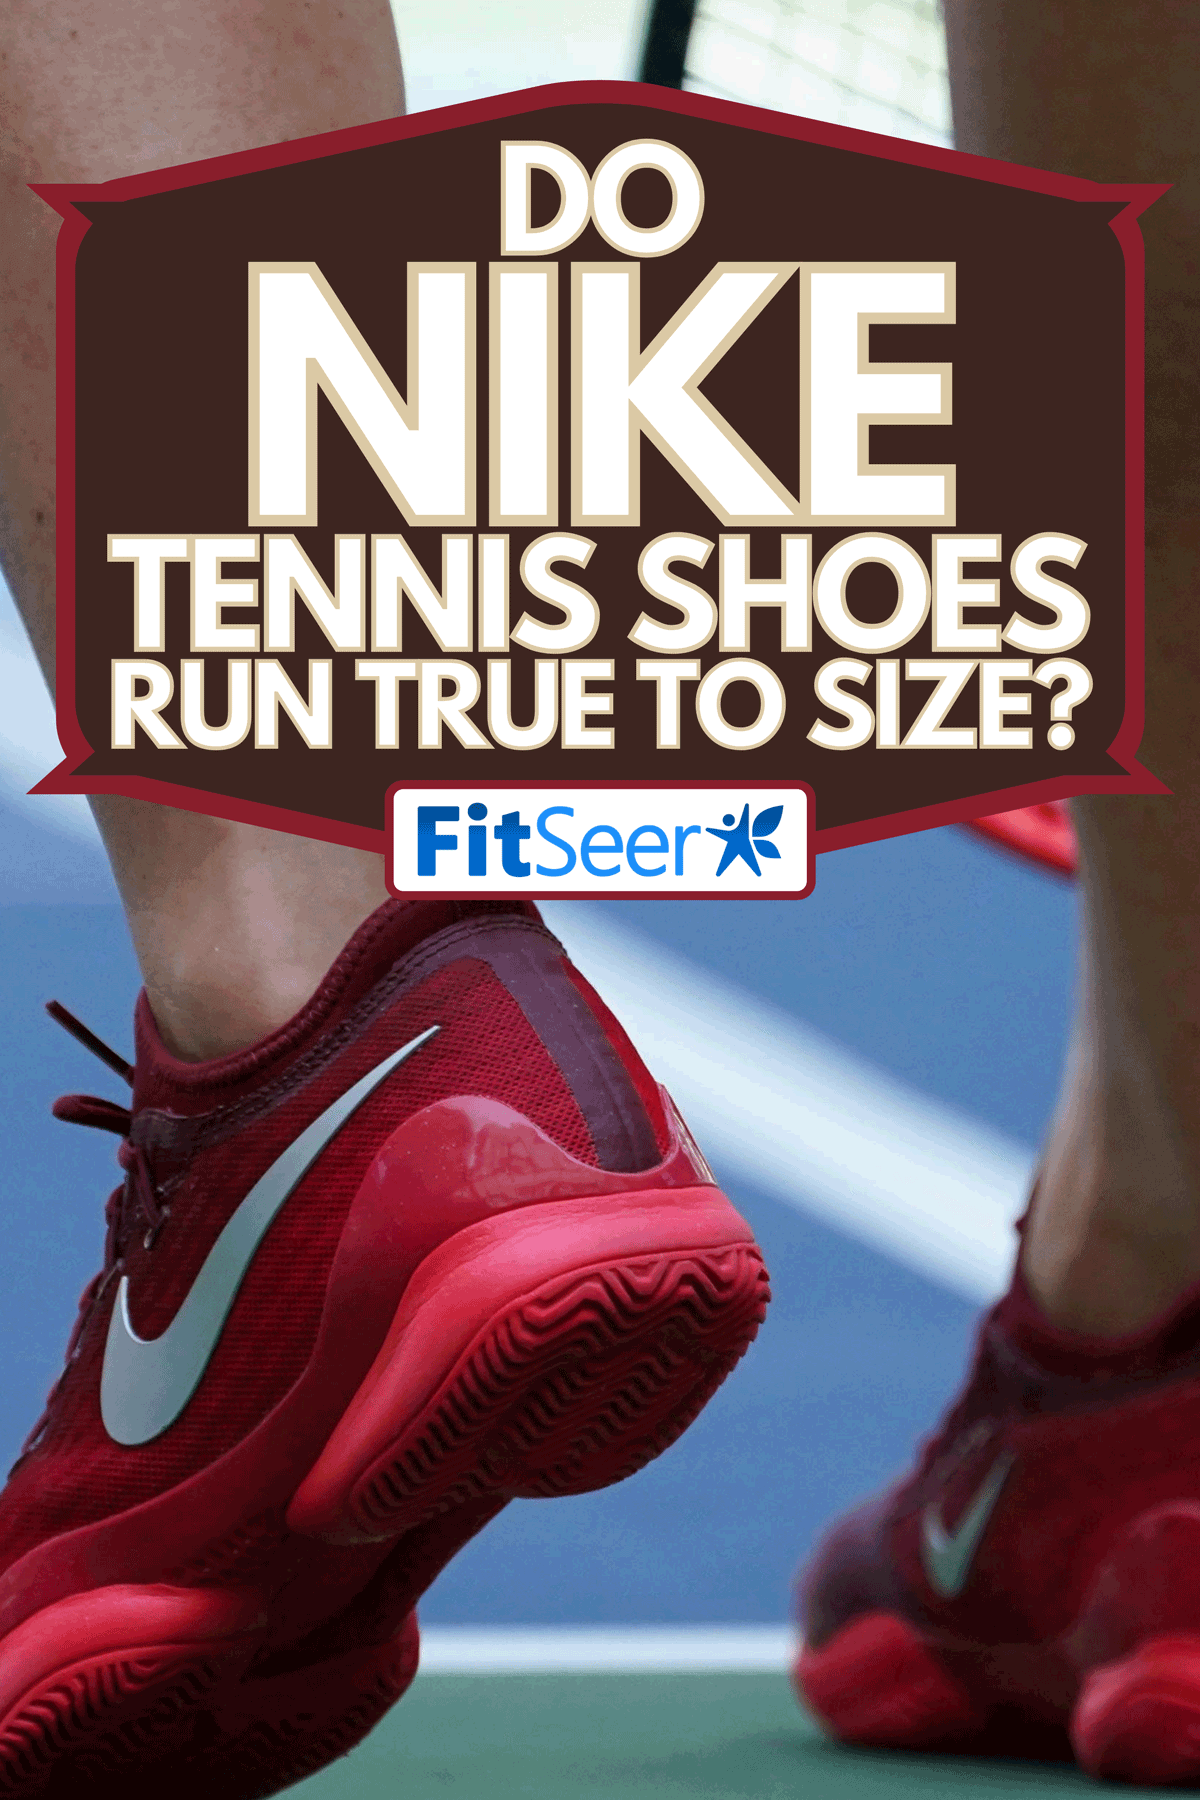 A professional tennis player wears custom Nike tennis shoes during her US Open, Do Nike Tennis Shoes Run True To Size?